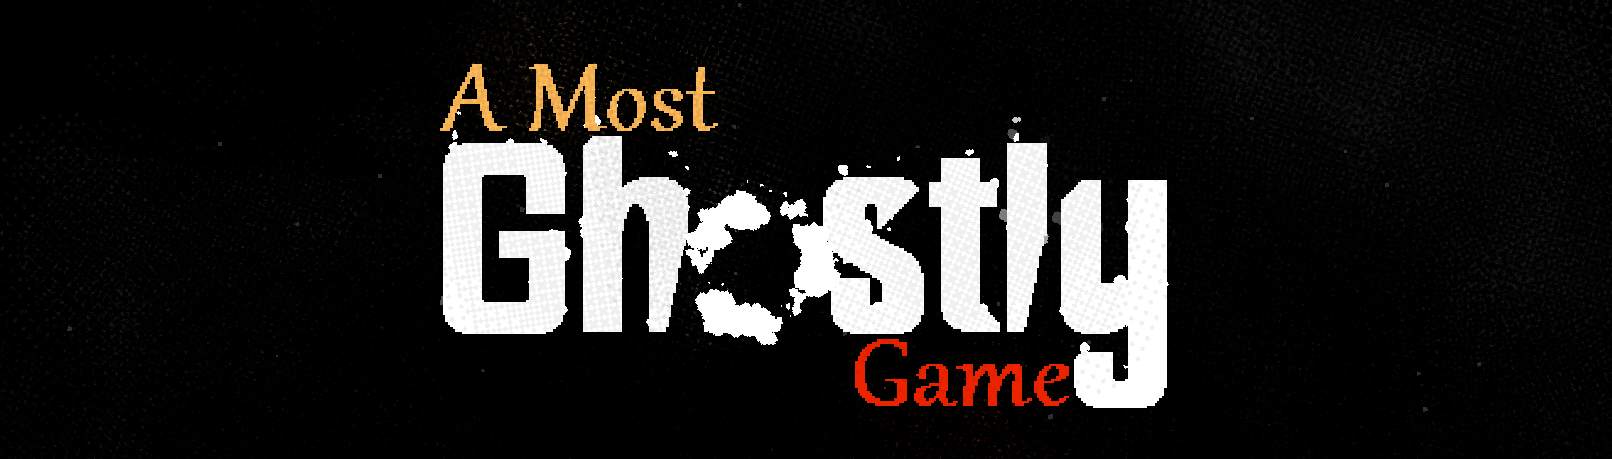 A Most Ghostly Game - Full version